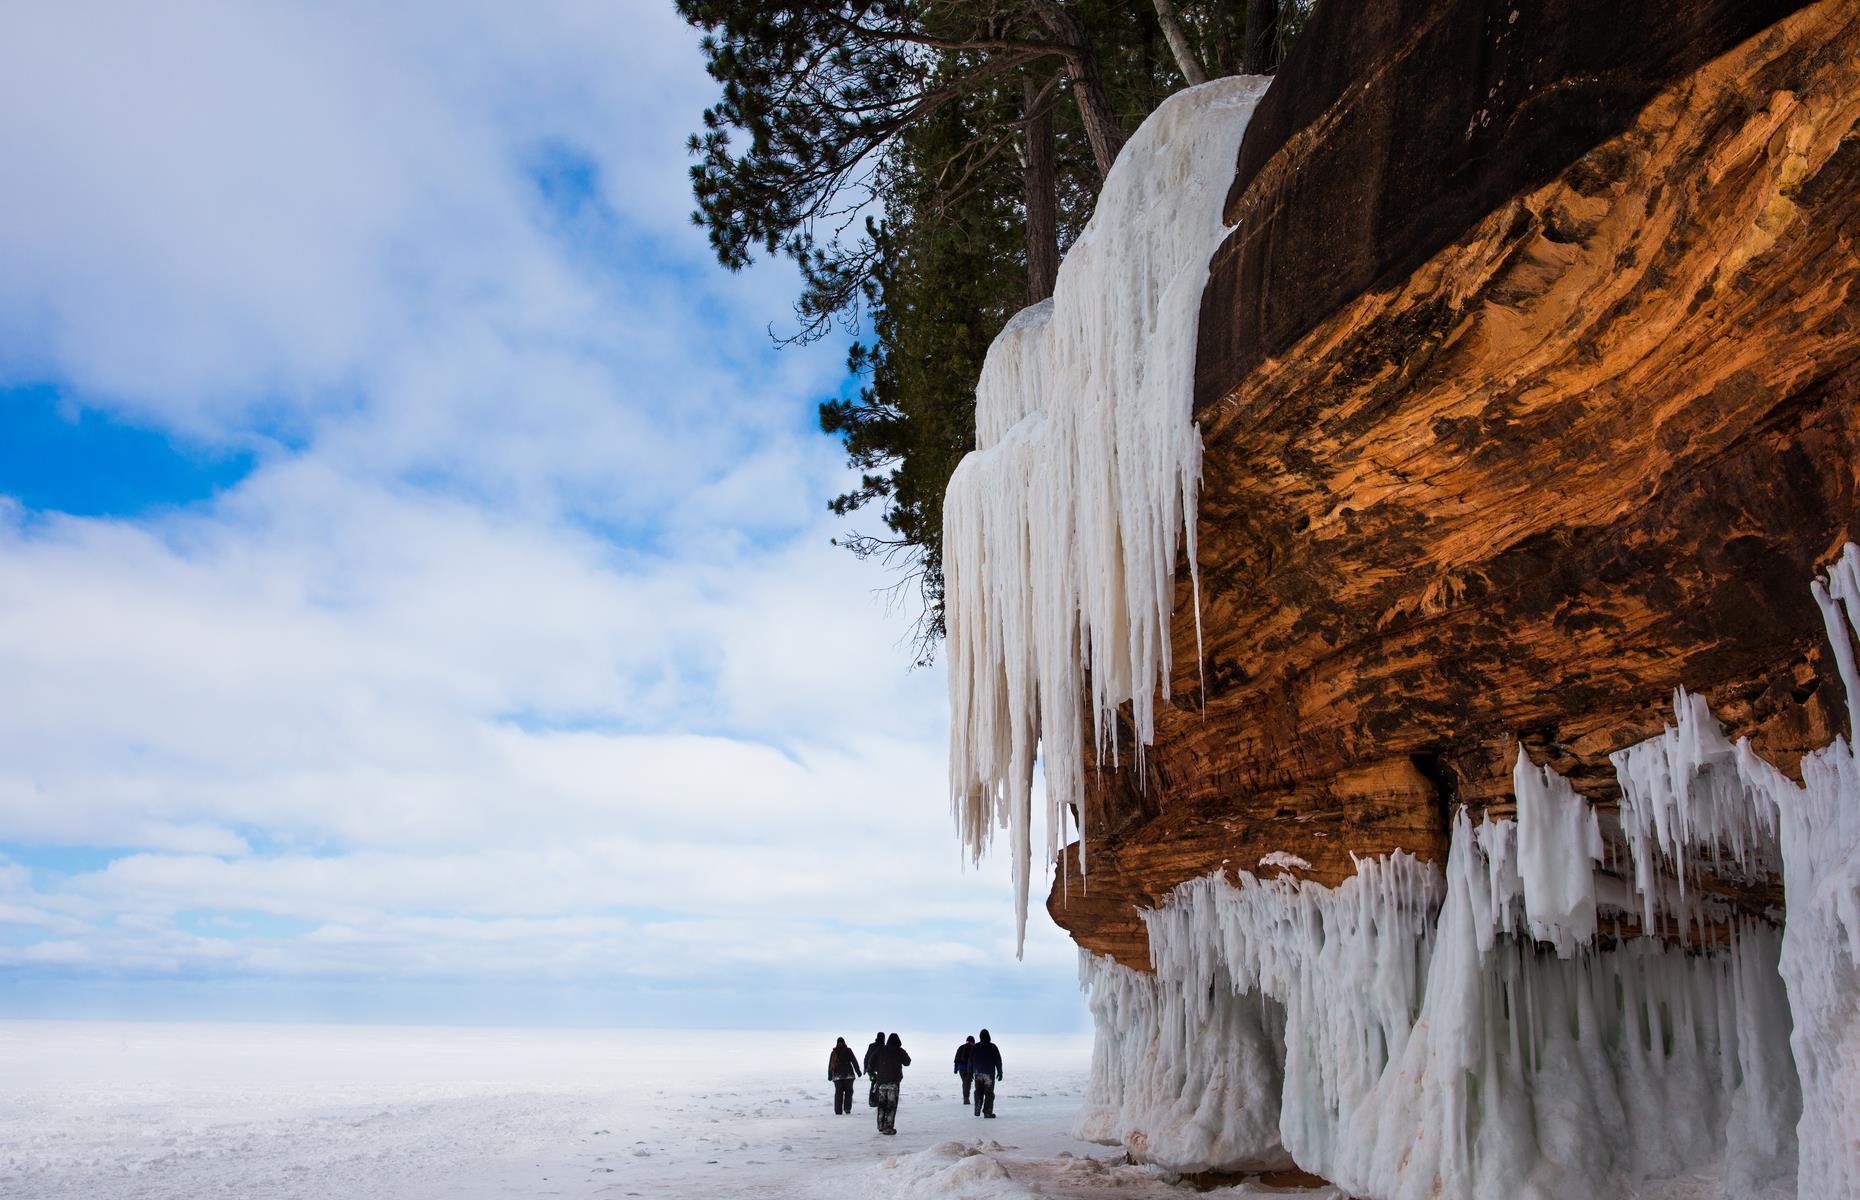 <p>A joy to explore year round, the <a href="https://www.nps.gov/apis/index.htm">Apostles Island National Lakeshore</a> comprises more than 20 islands and a scenic swathe of the mainland hugging Lake Superior. In summer, take to the lake in a kayak, drinking in sandstone cliffs and caves as you paddle. Or in winter (if the conditions are right) explore the incredible ice caves formed at the western end of the mainland. You can also camp on most of the islands and on the mainland too.</p>